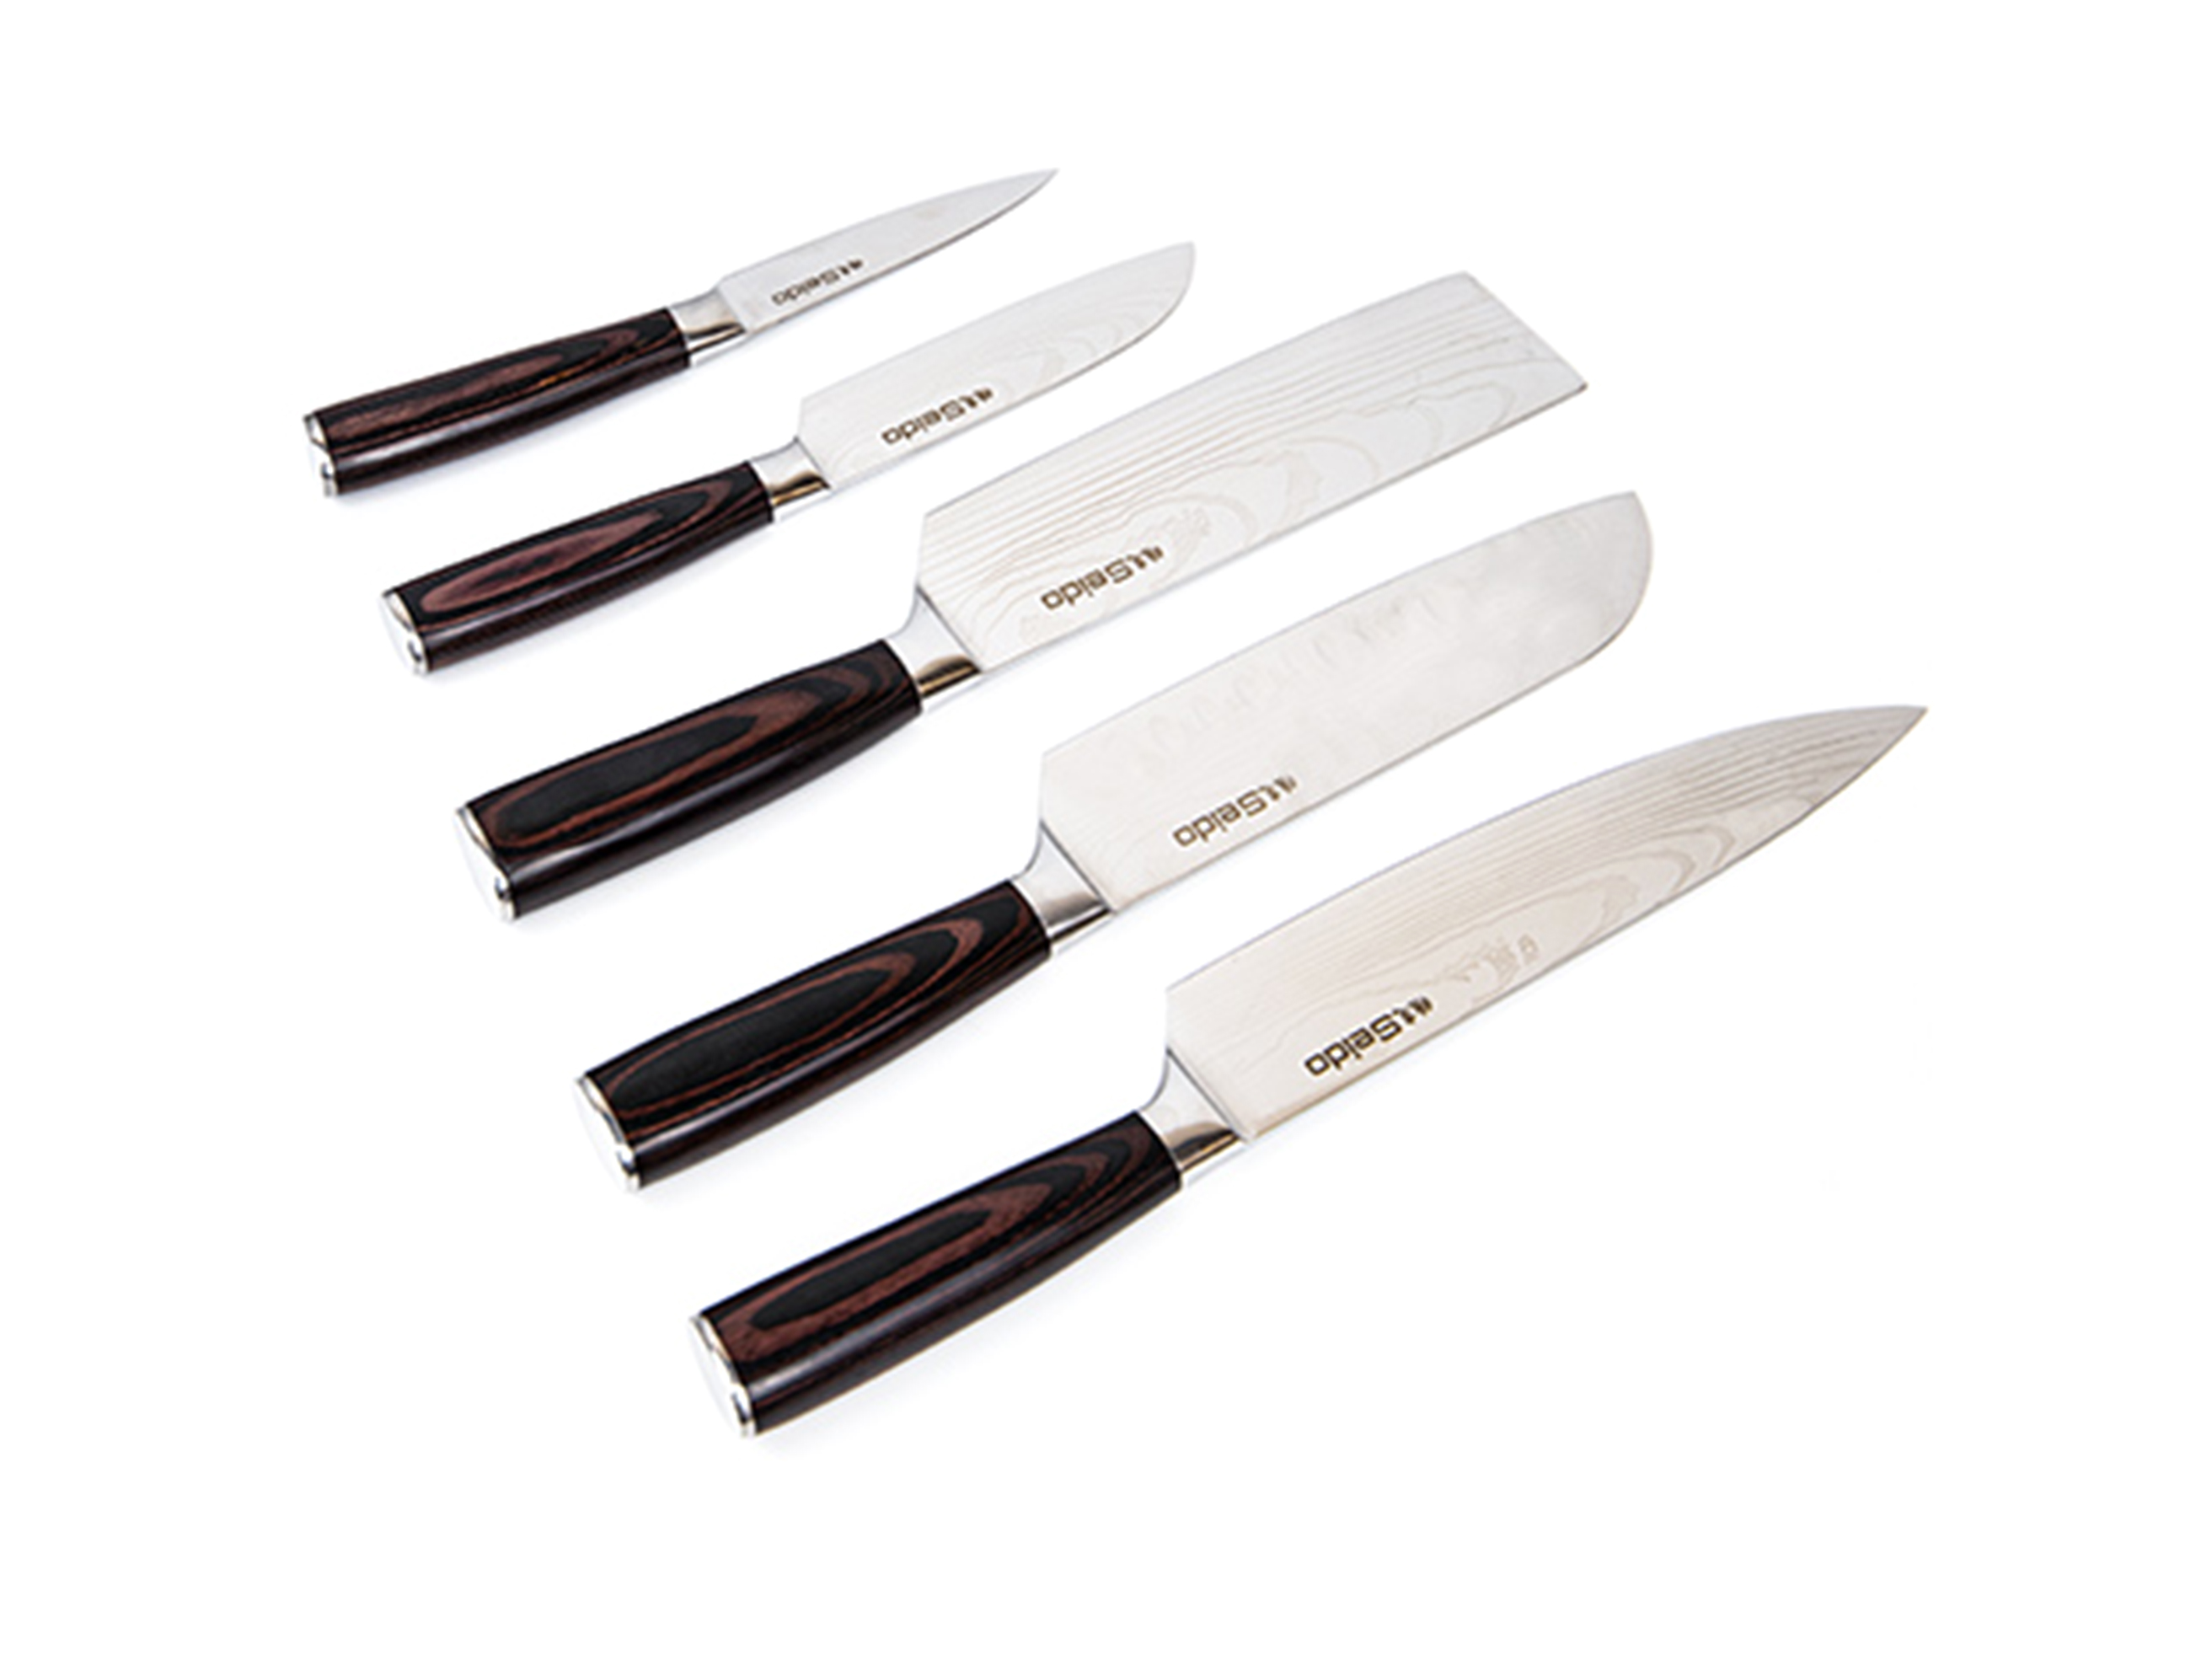 Forged Construction & 15° Angle—Get This Set of Premium Knives Designed for All Your Slicing Needs!